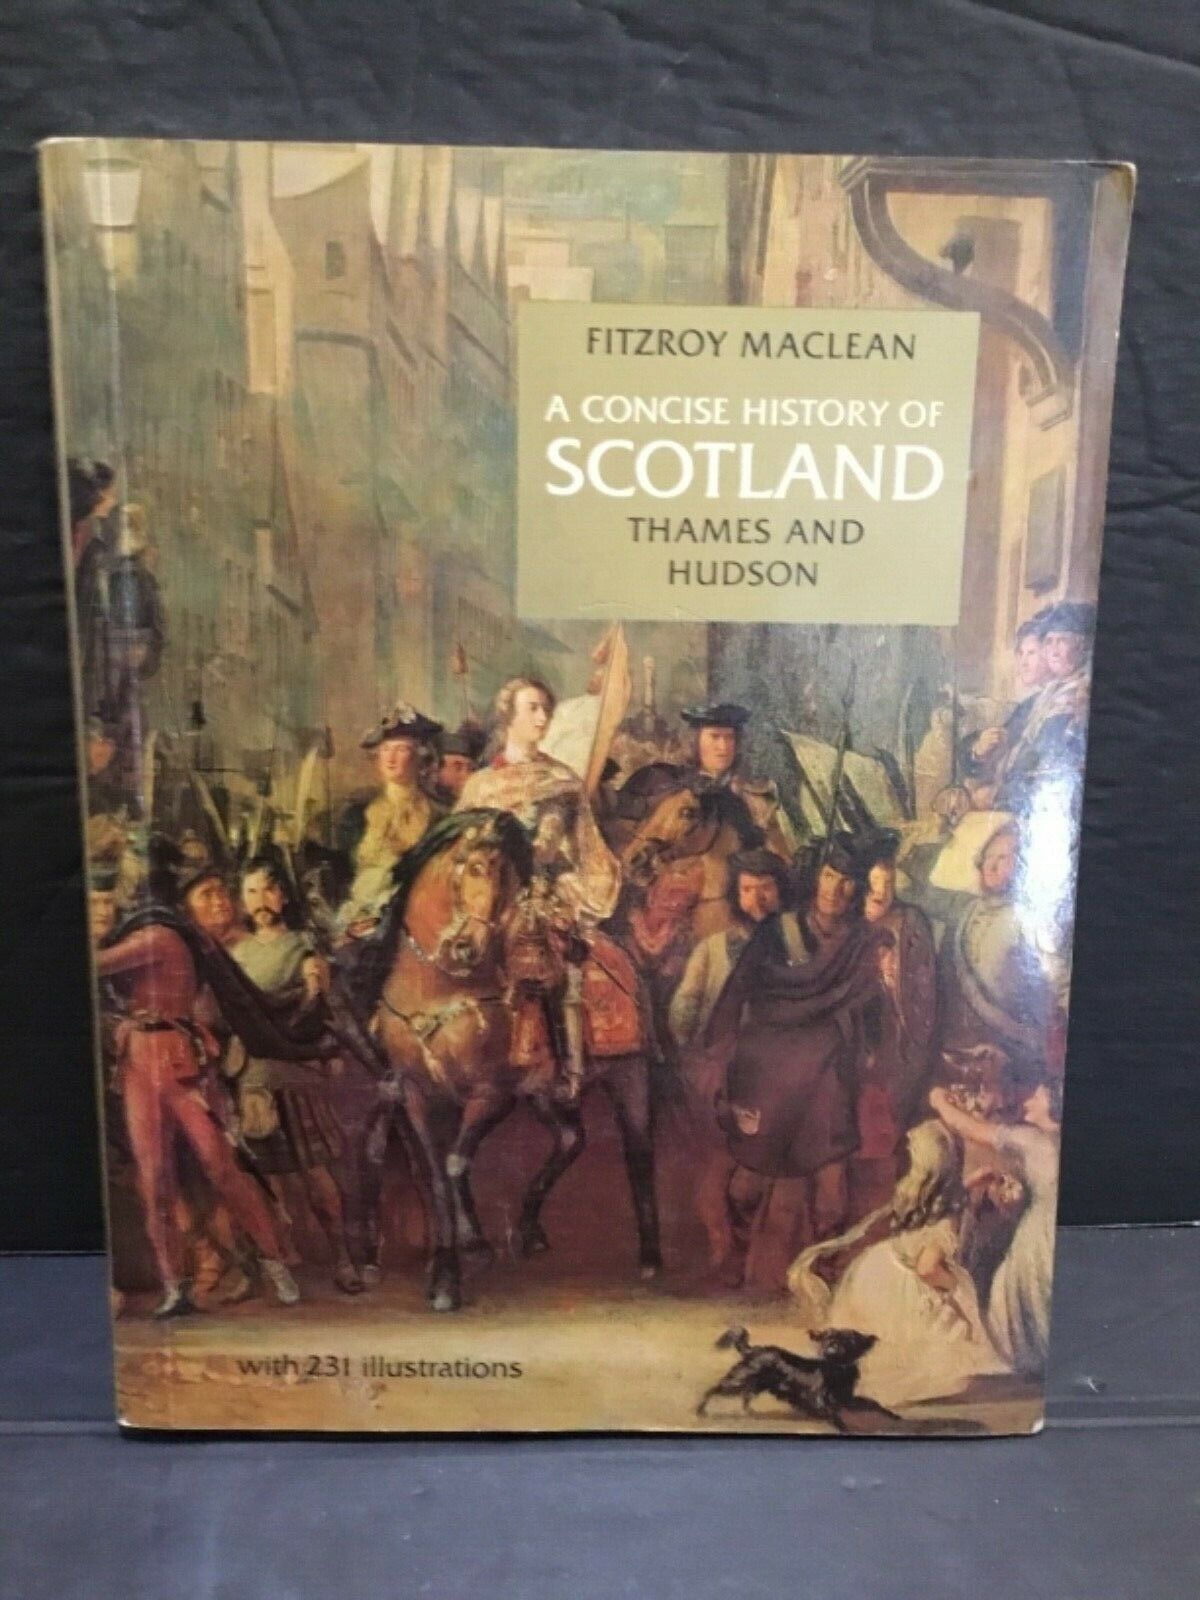 1988, A Concise History of Scotland Thames & Hudson, by Fitzroy Maclean